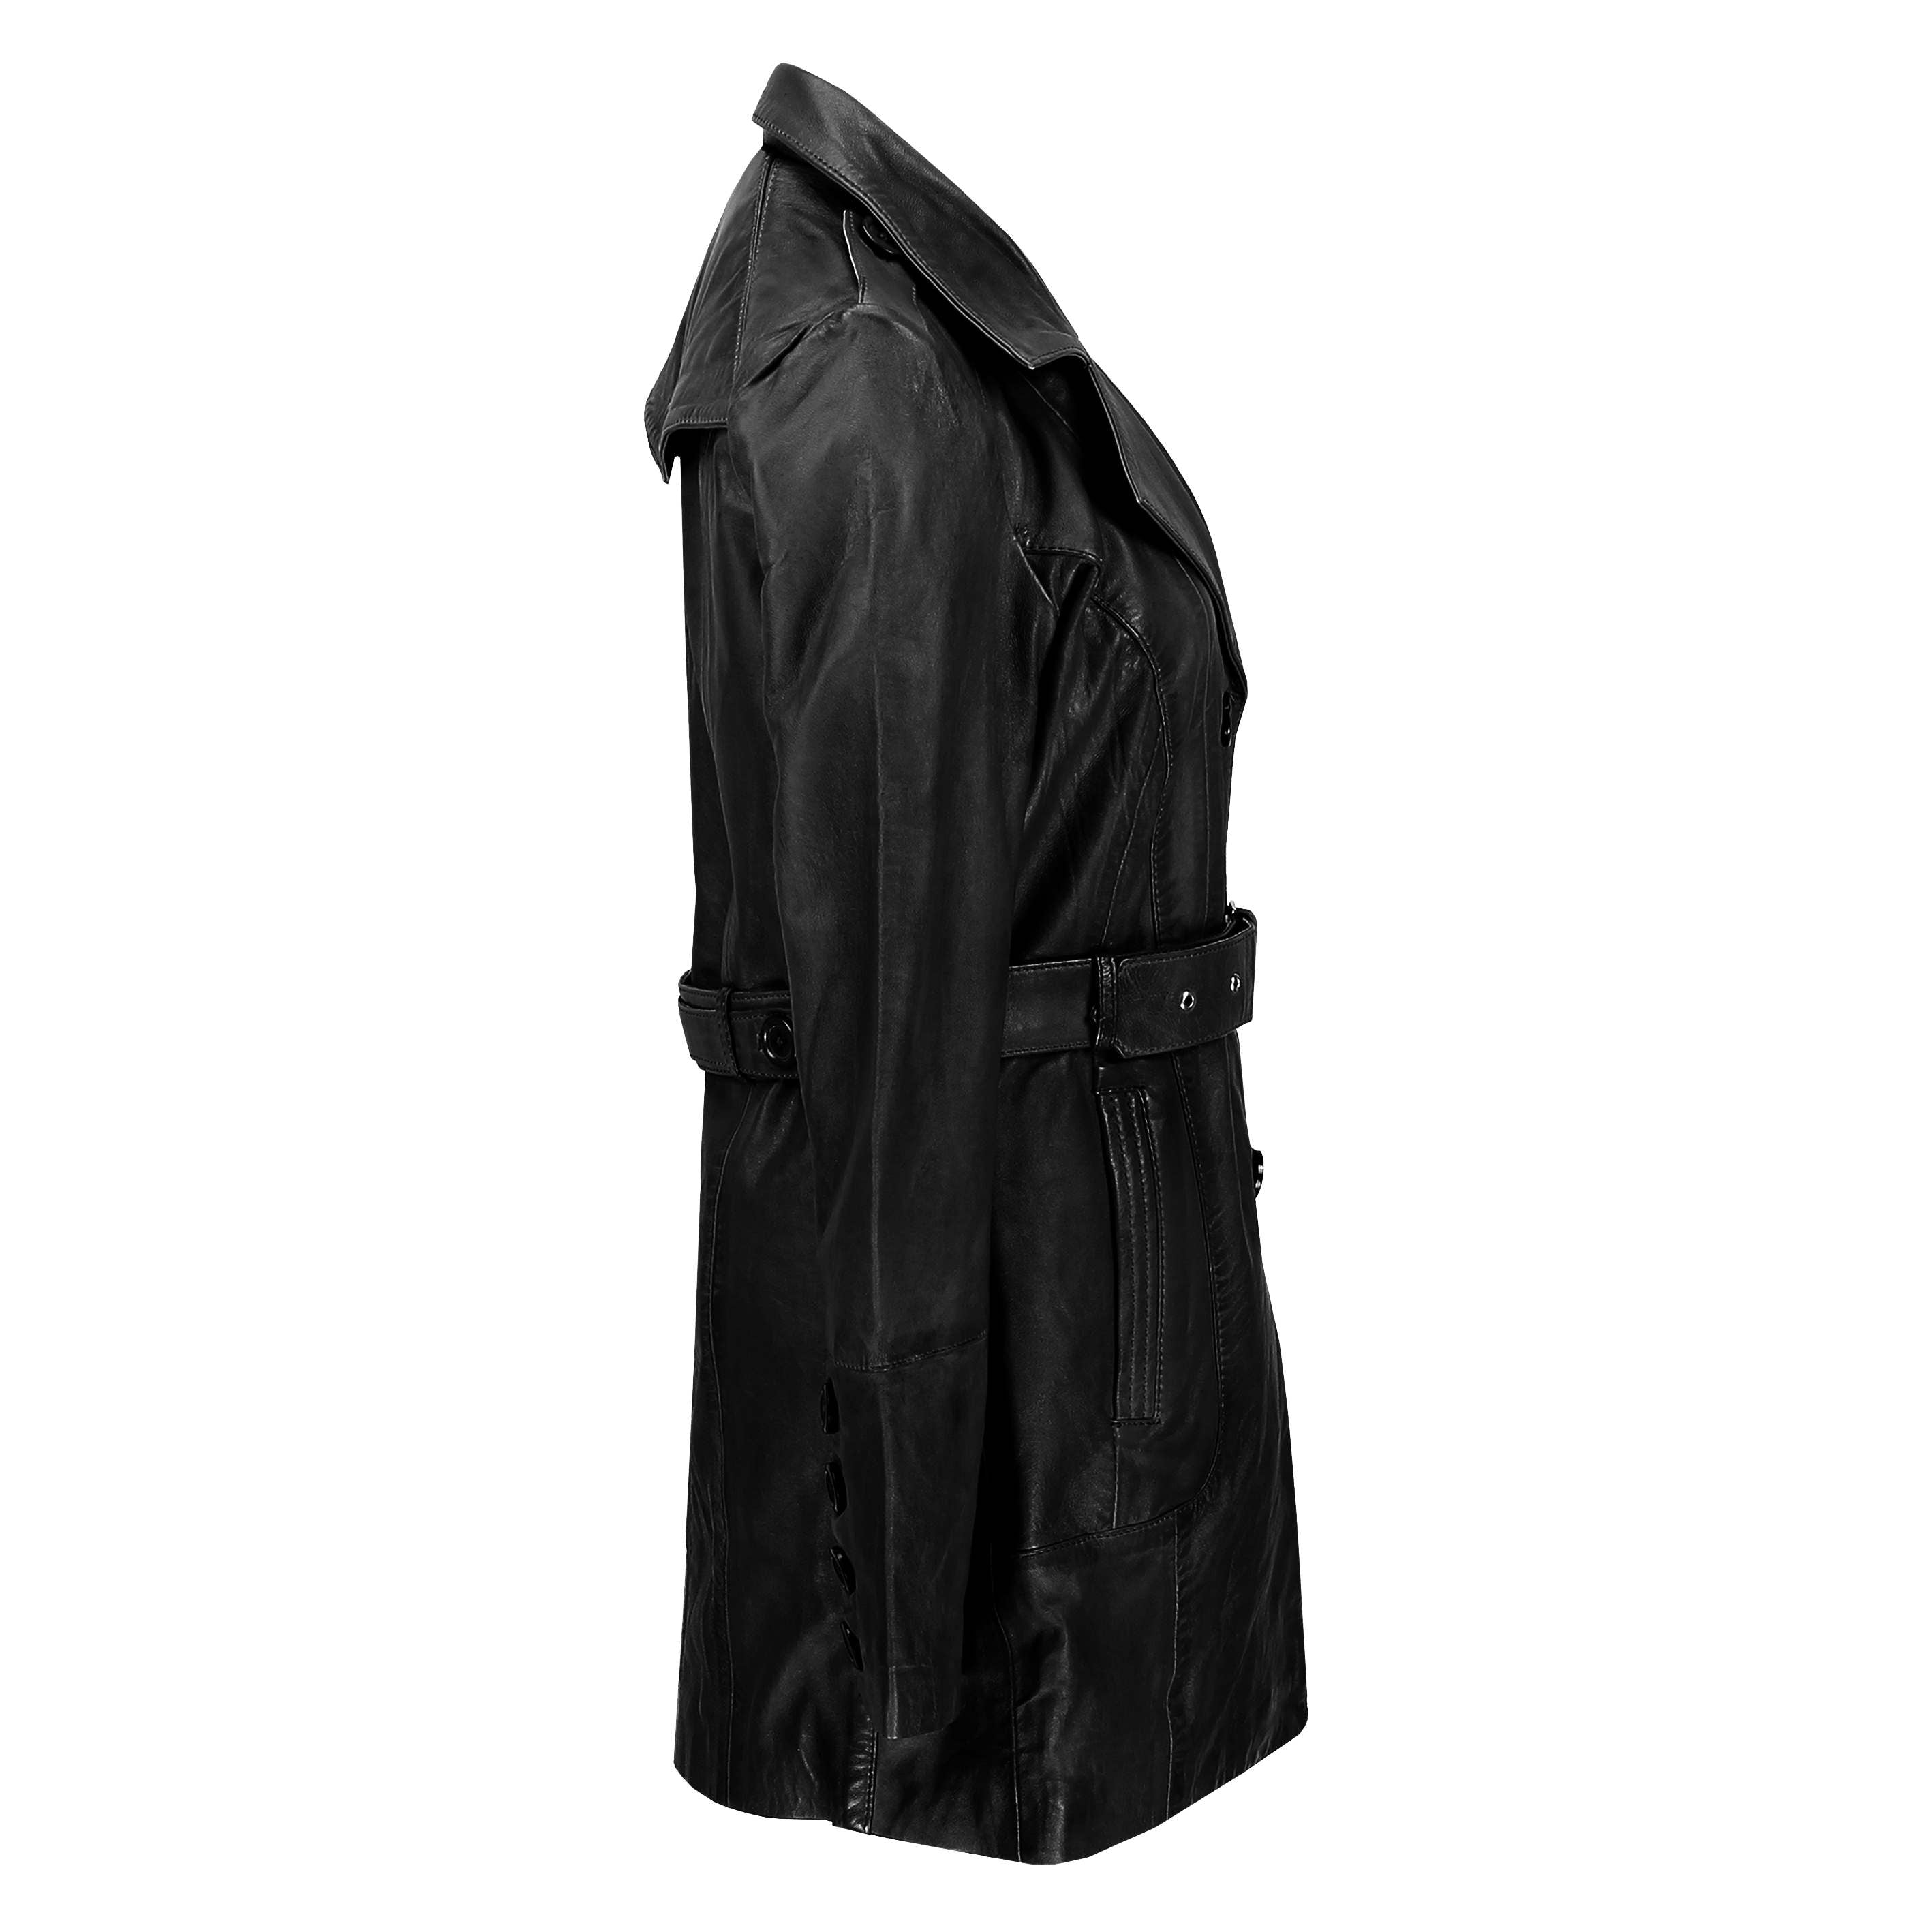 WOMEN'S CLASSIC TRENCH JACKET